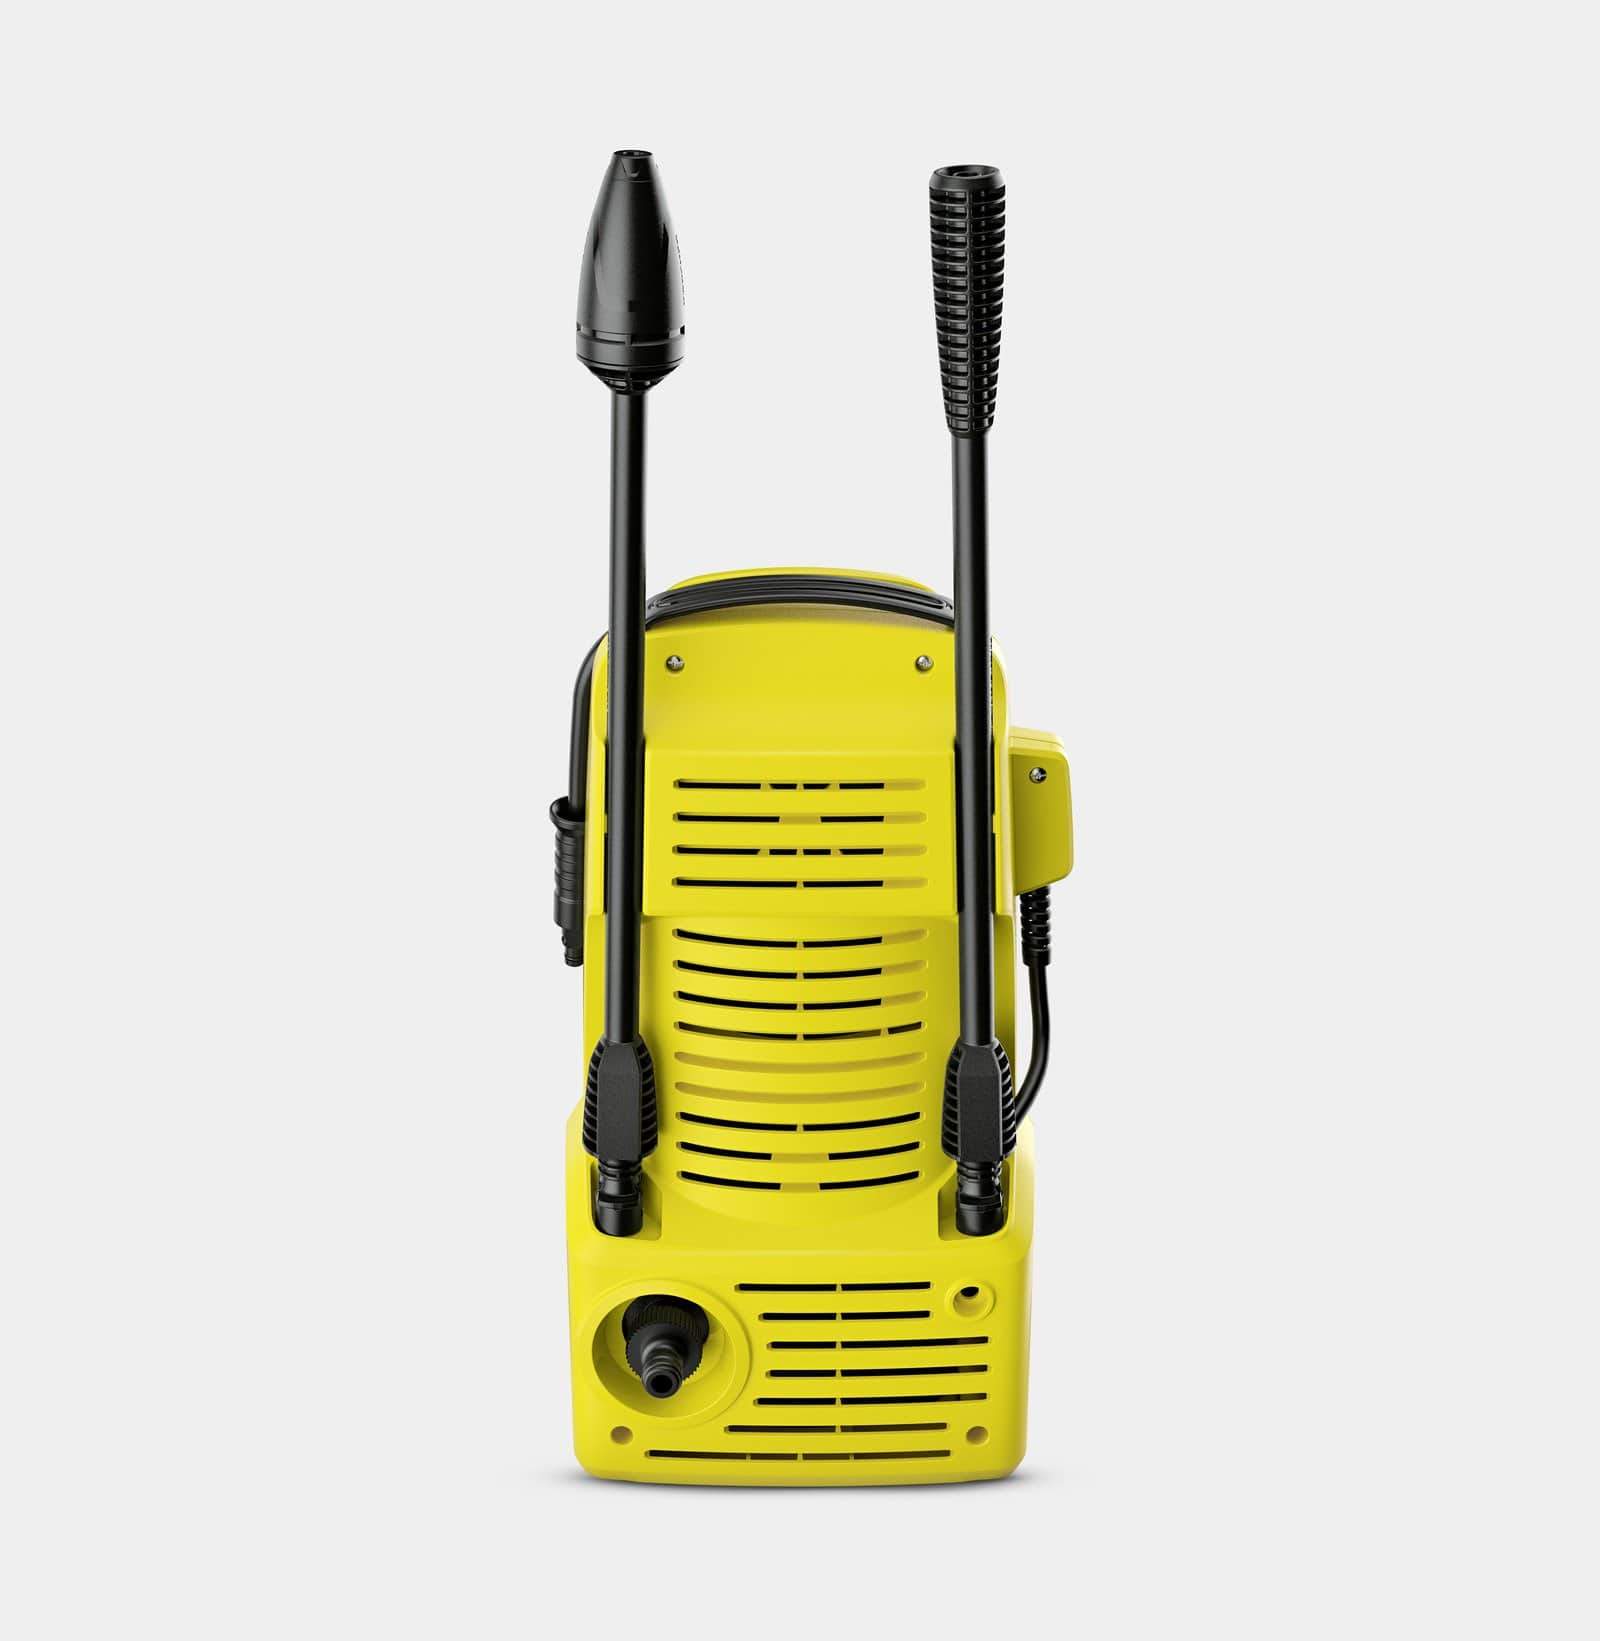 Karcher Electric K2 Compact High Pressure Washer 110 Bar | Supply Master | Accra, Ghana Tools Building Steel Engineering Hardware tool